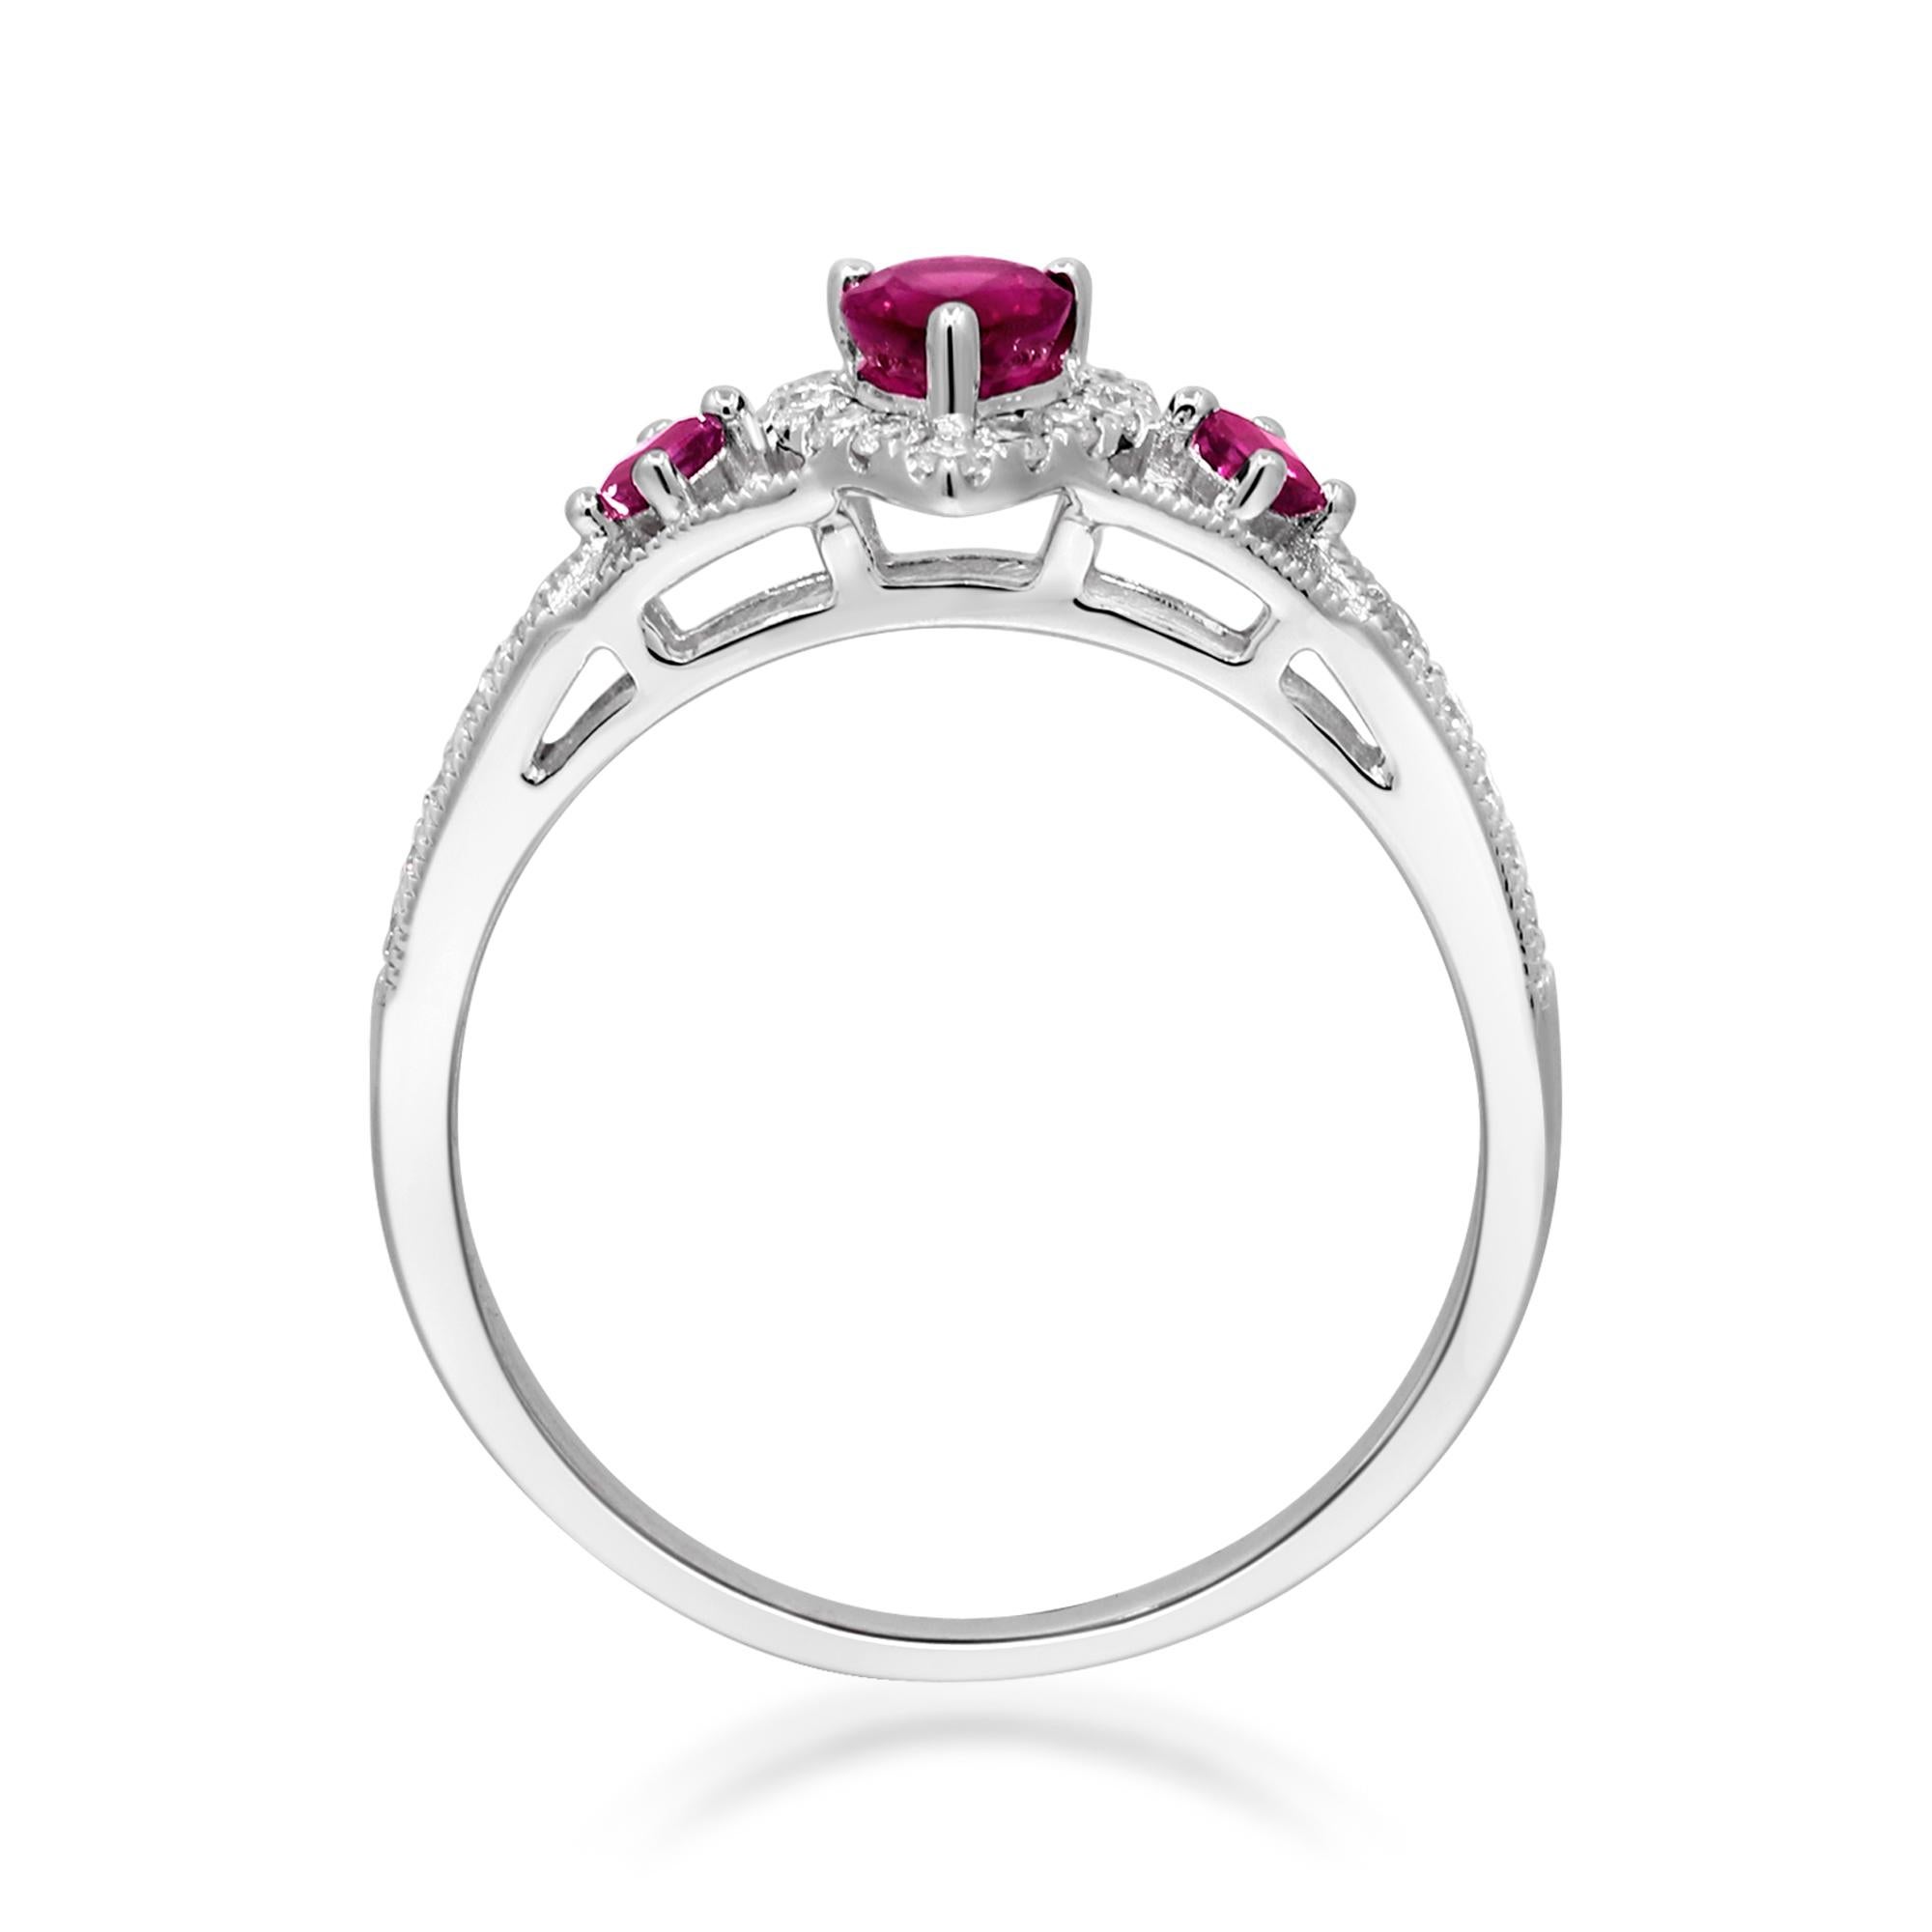 Decorate yourself in elegance with this Ring is crafted from 14-karat White Gold by Gin & Grace. This Ring is made up of 6x4 mm Pear-Cut Ruby (1 pcs) 0.50 carat, 2.0 mm Square-cut Ruby (2 pcs) 0.13 carat and Round-cut White Diamond (24 Pcs) 0.21